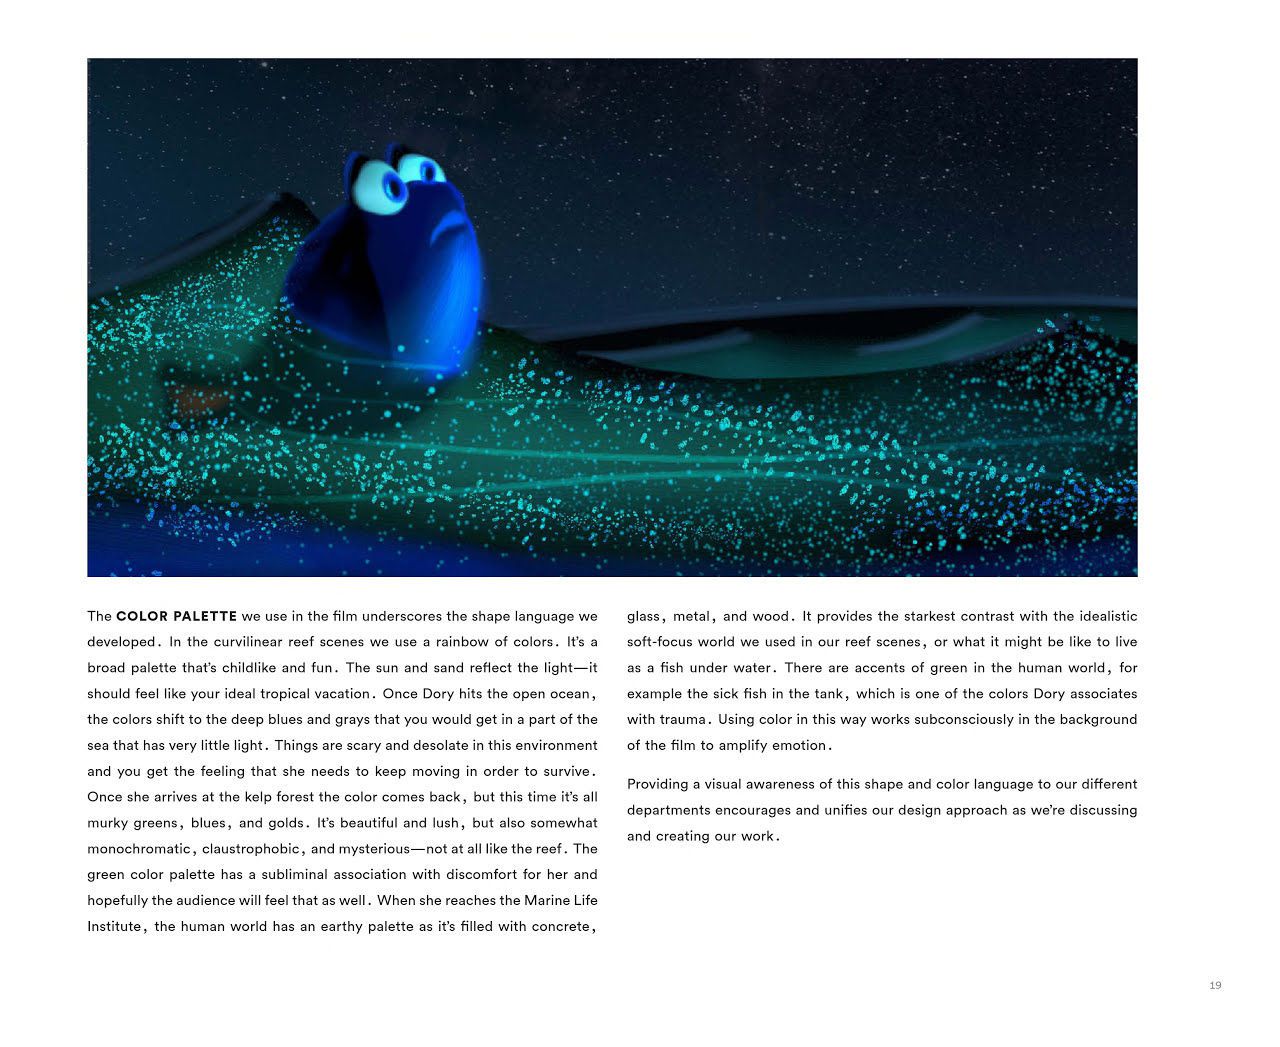 The Art of Finding Dory 20